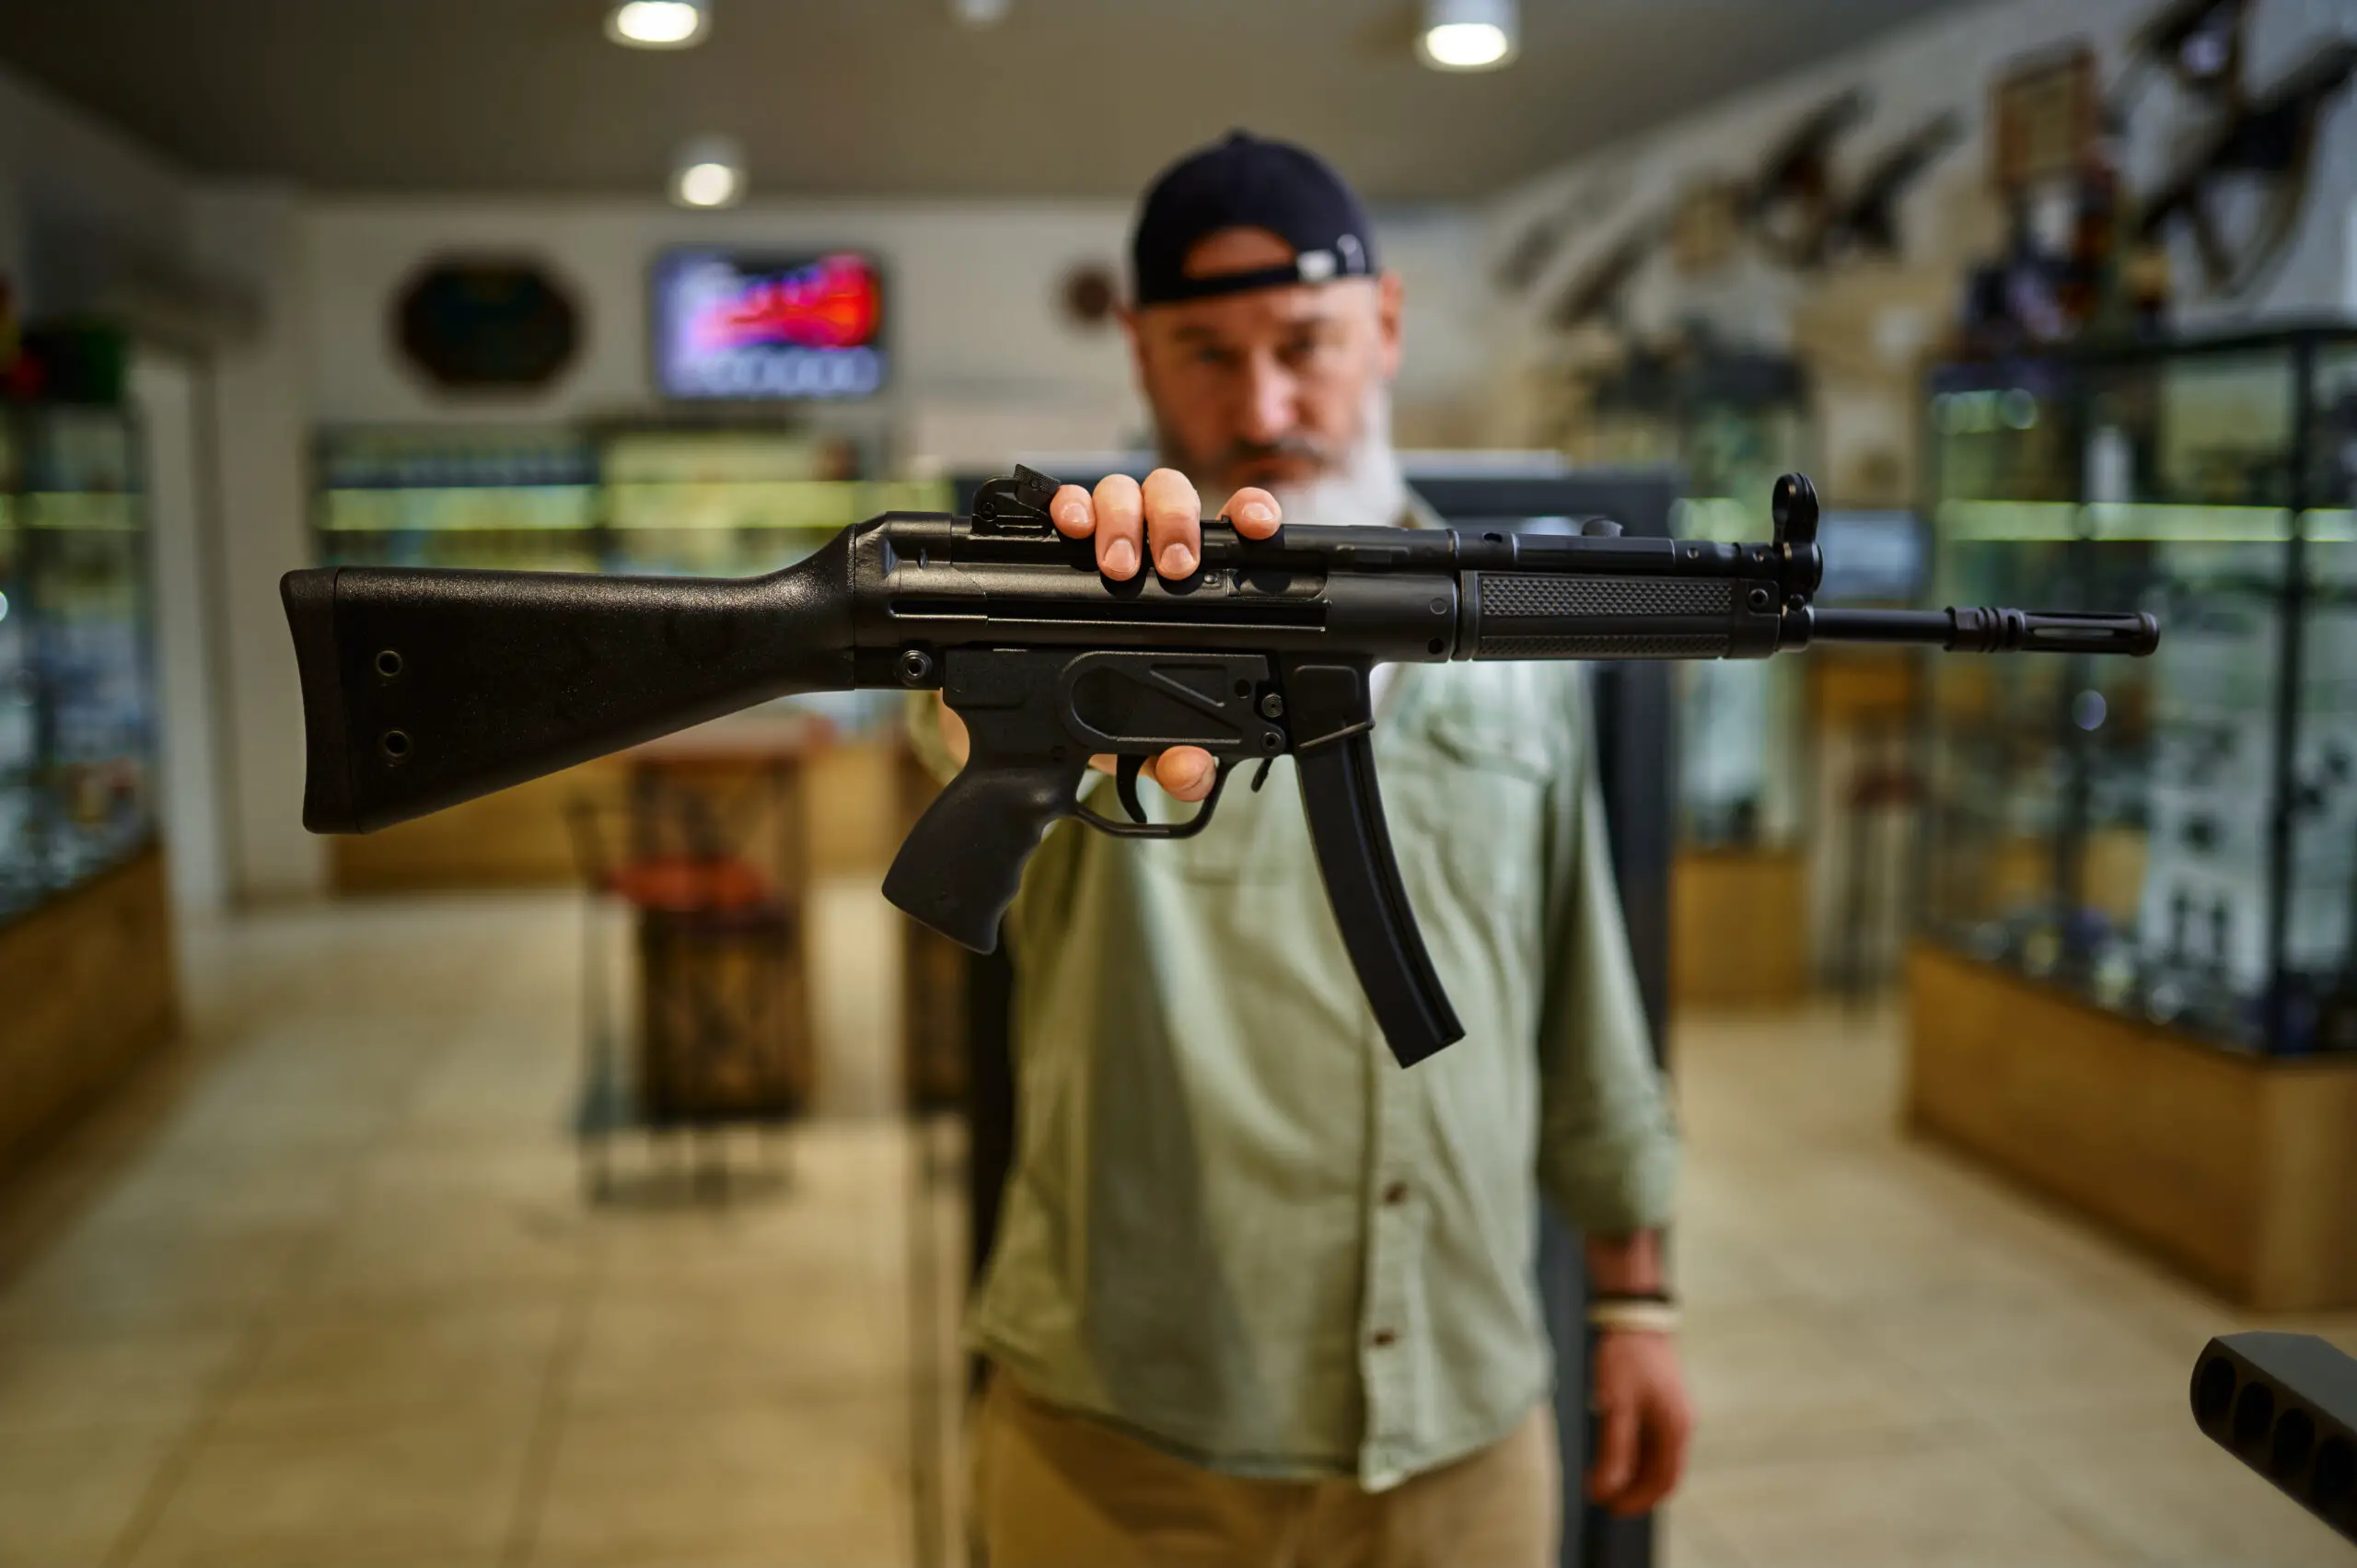 Male seller shows automatic rifle in gun store. Weapon shop interior, ammo and ammunition assortment, firearms choice, shooting hobby and lifestyle, self protection